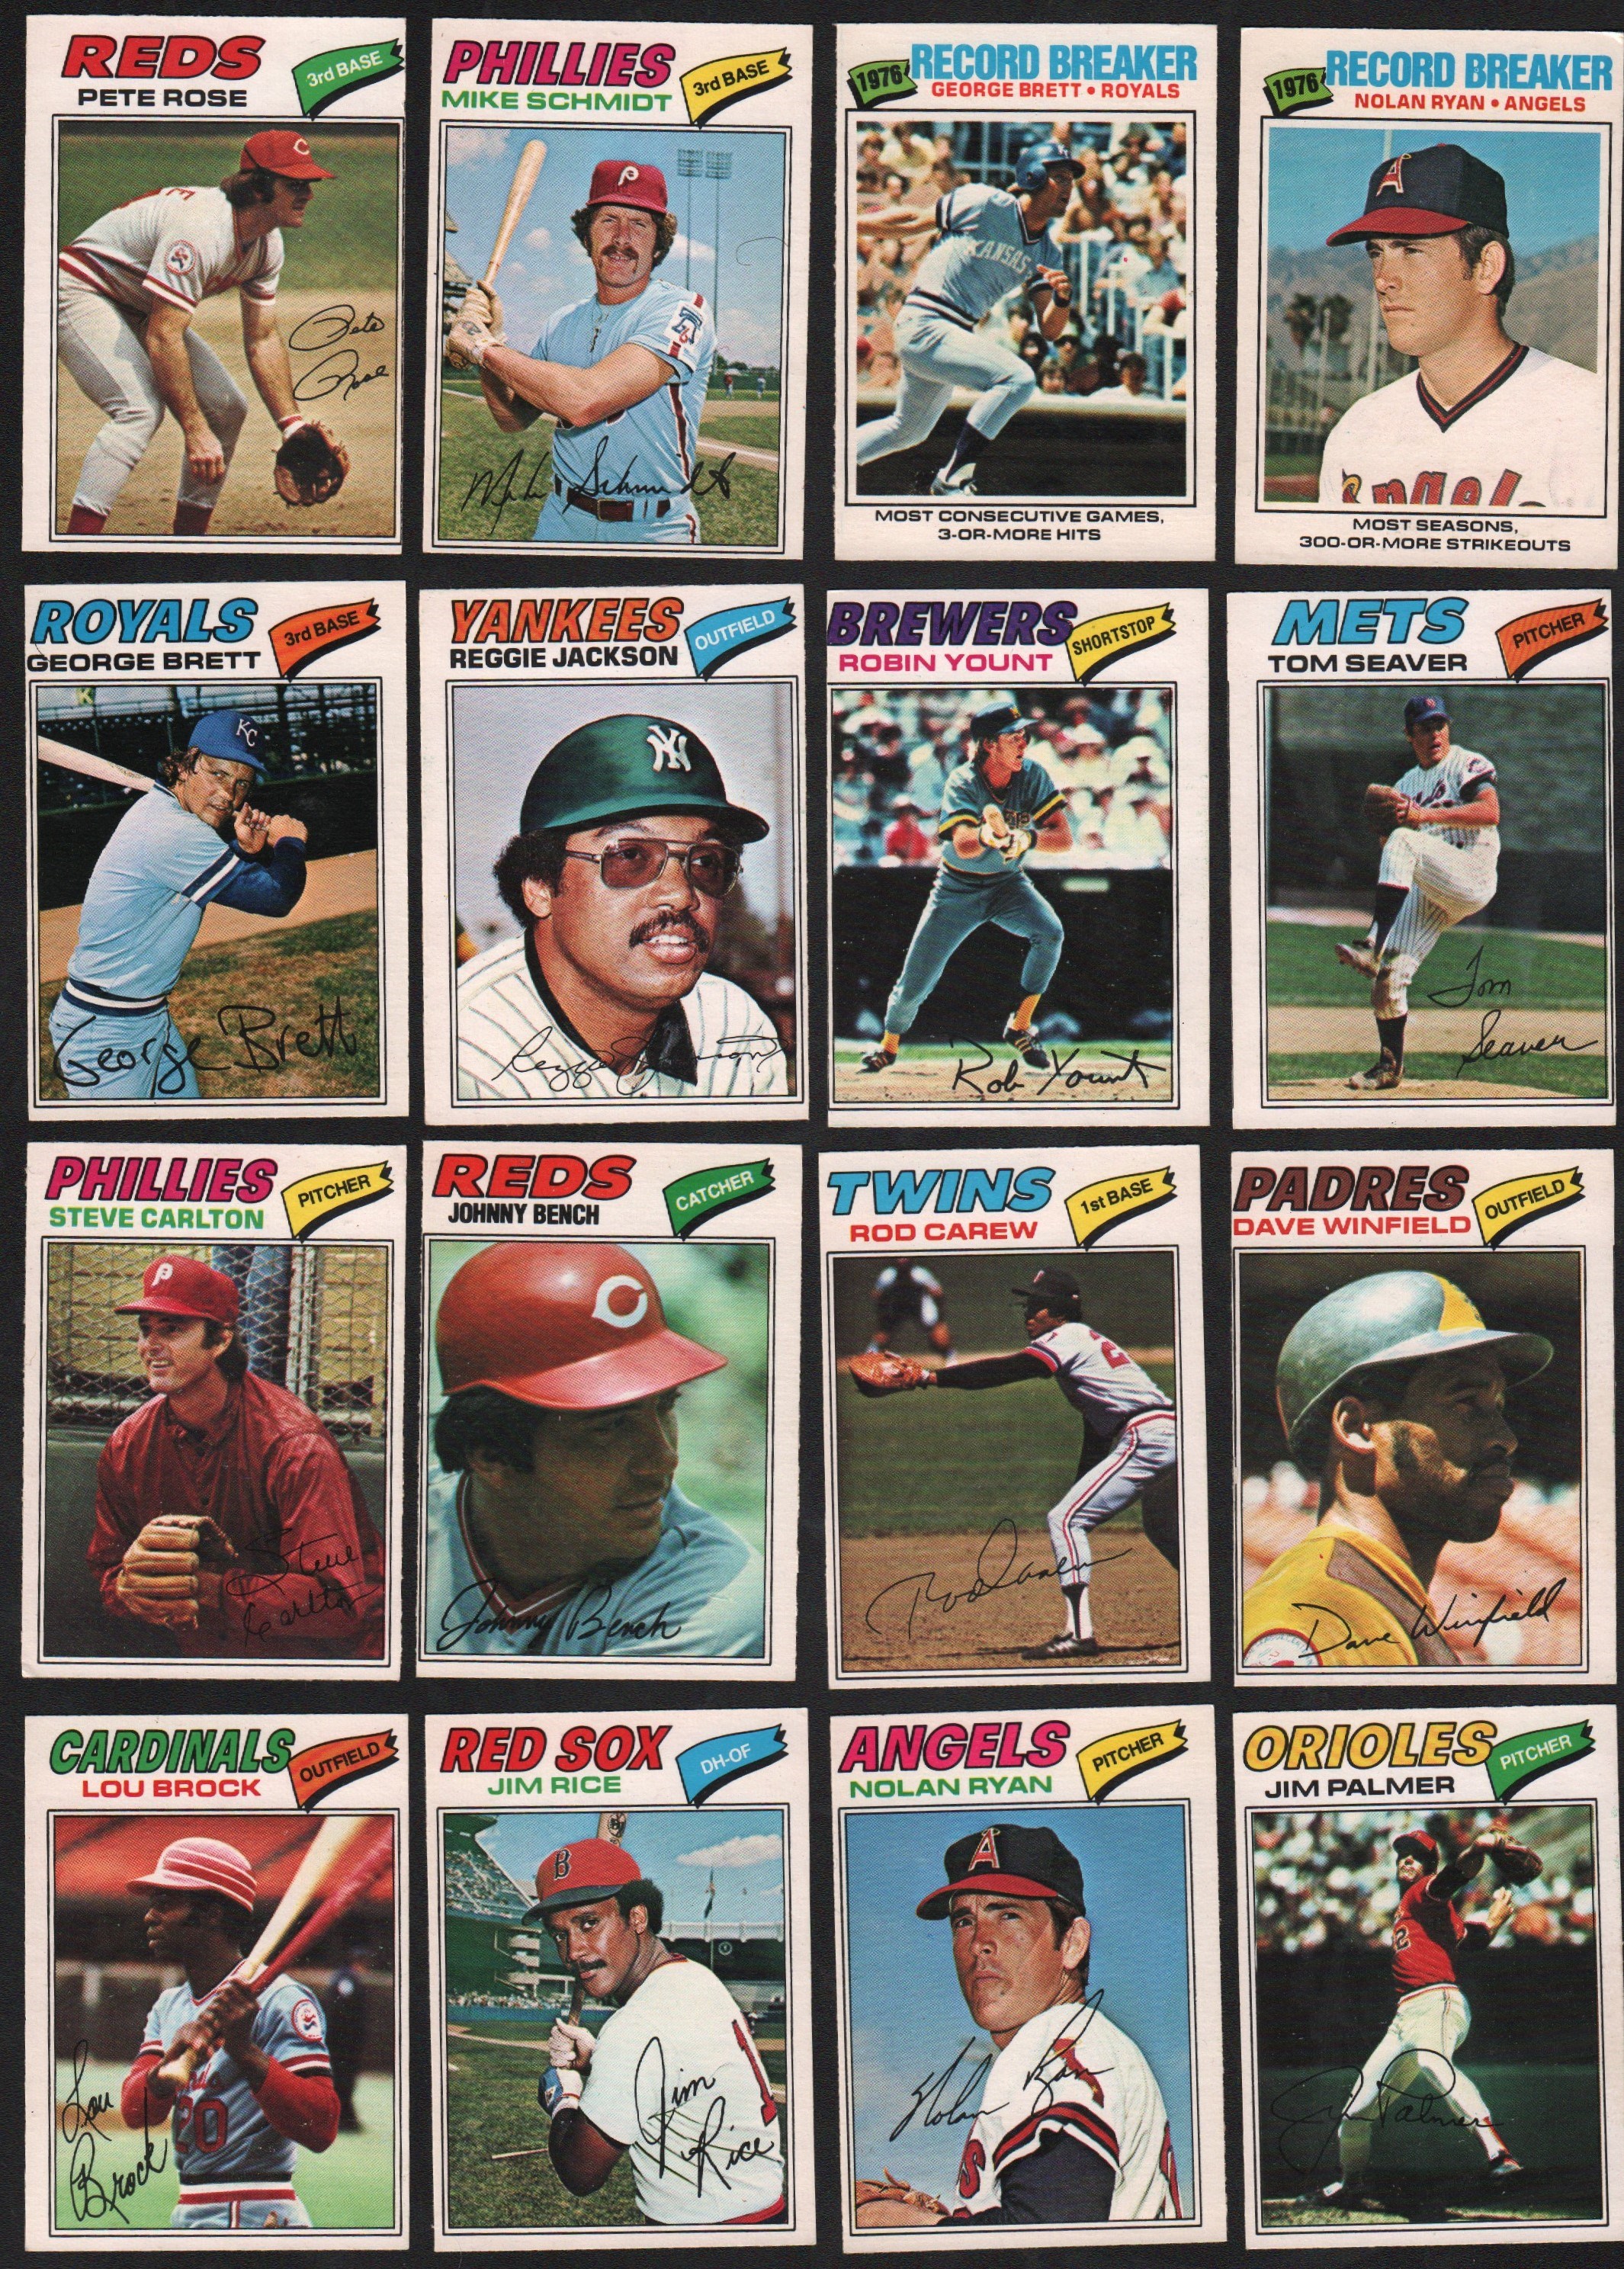 1977 O-Pee-Chee Baseball Complete Set of 264 Cards